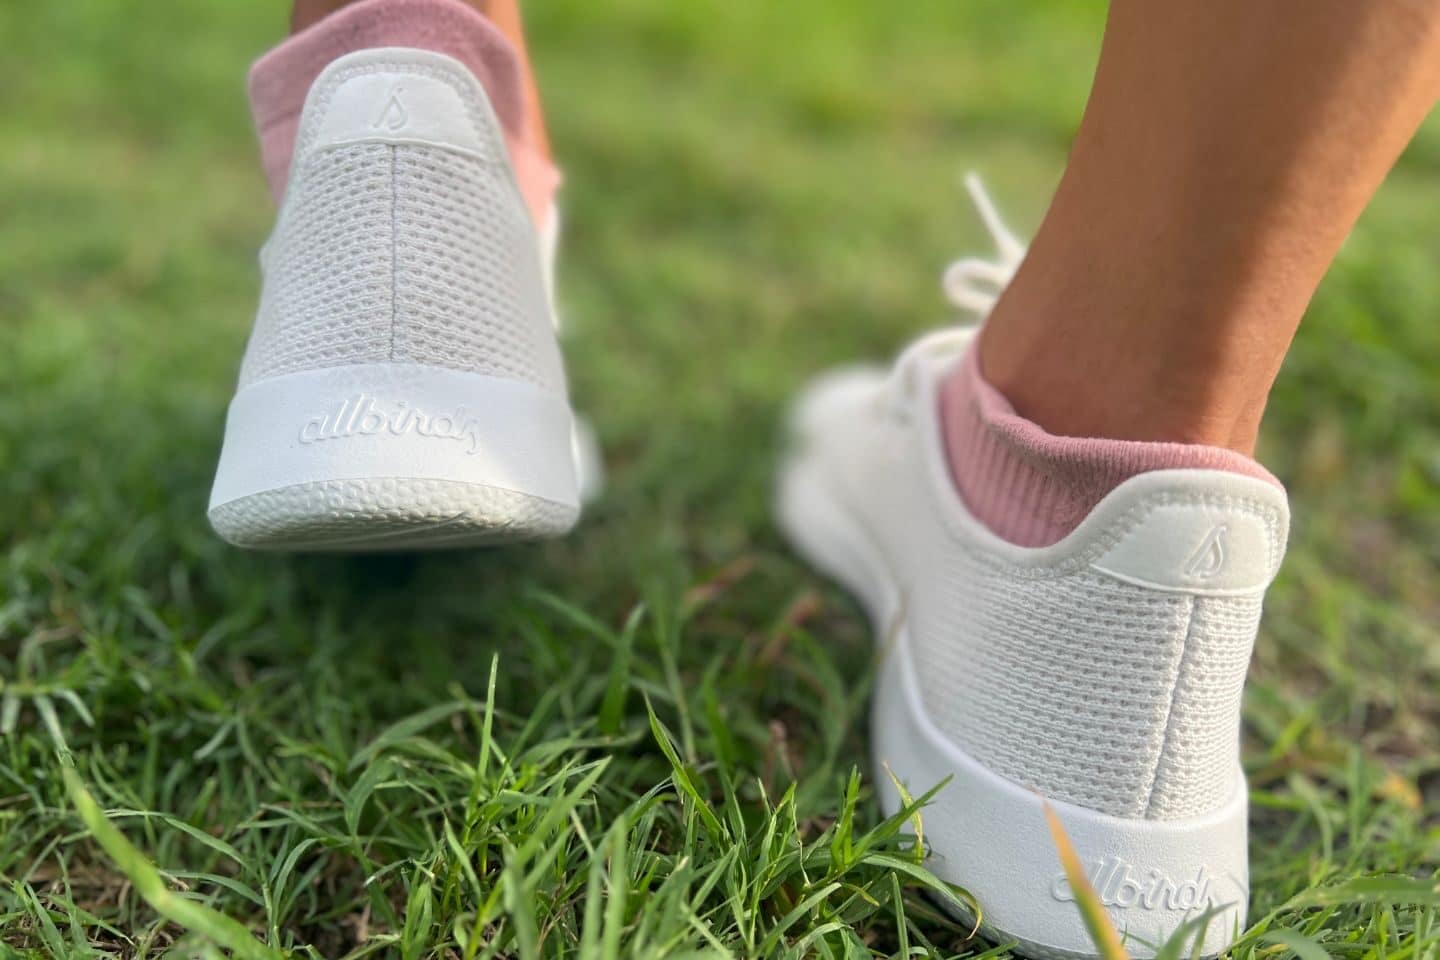 Anna in Allbirds Tree Runners shoes walking on the grass